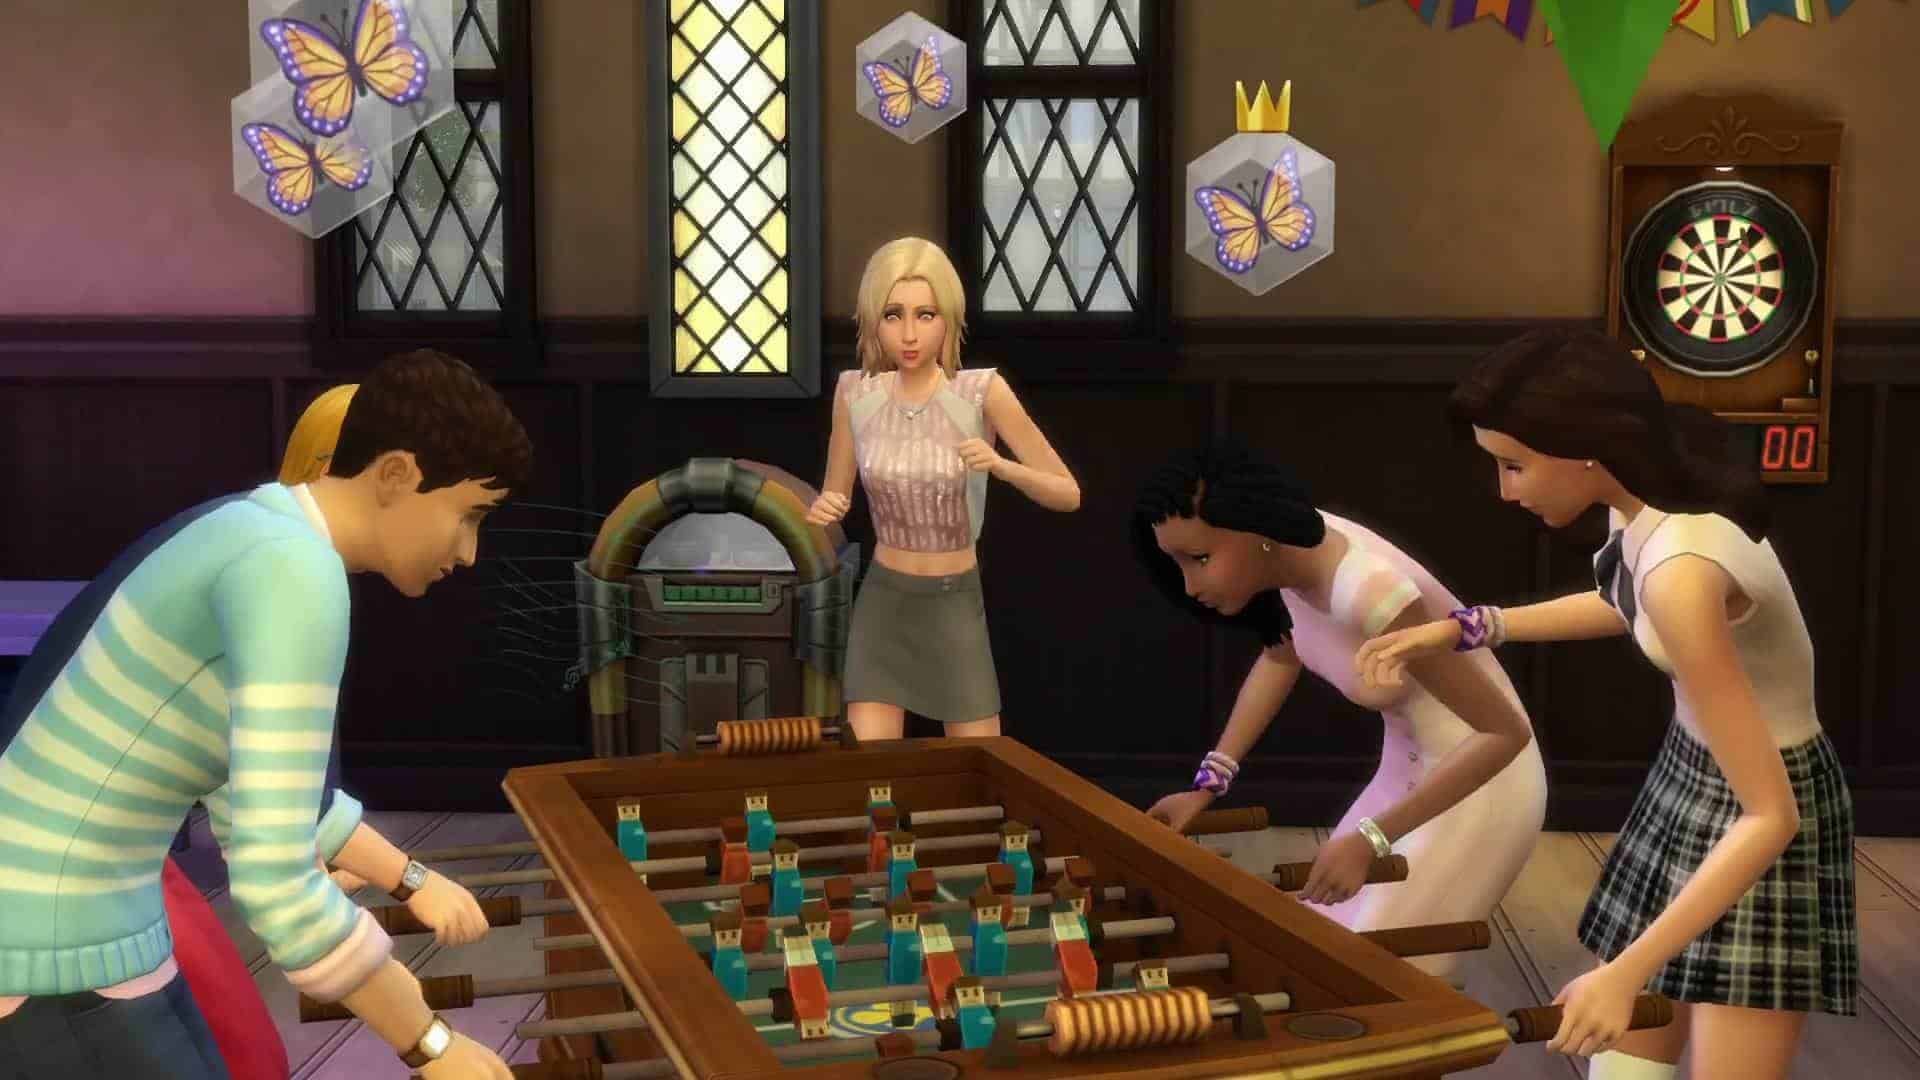 sims 4 get together download free